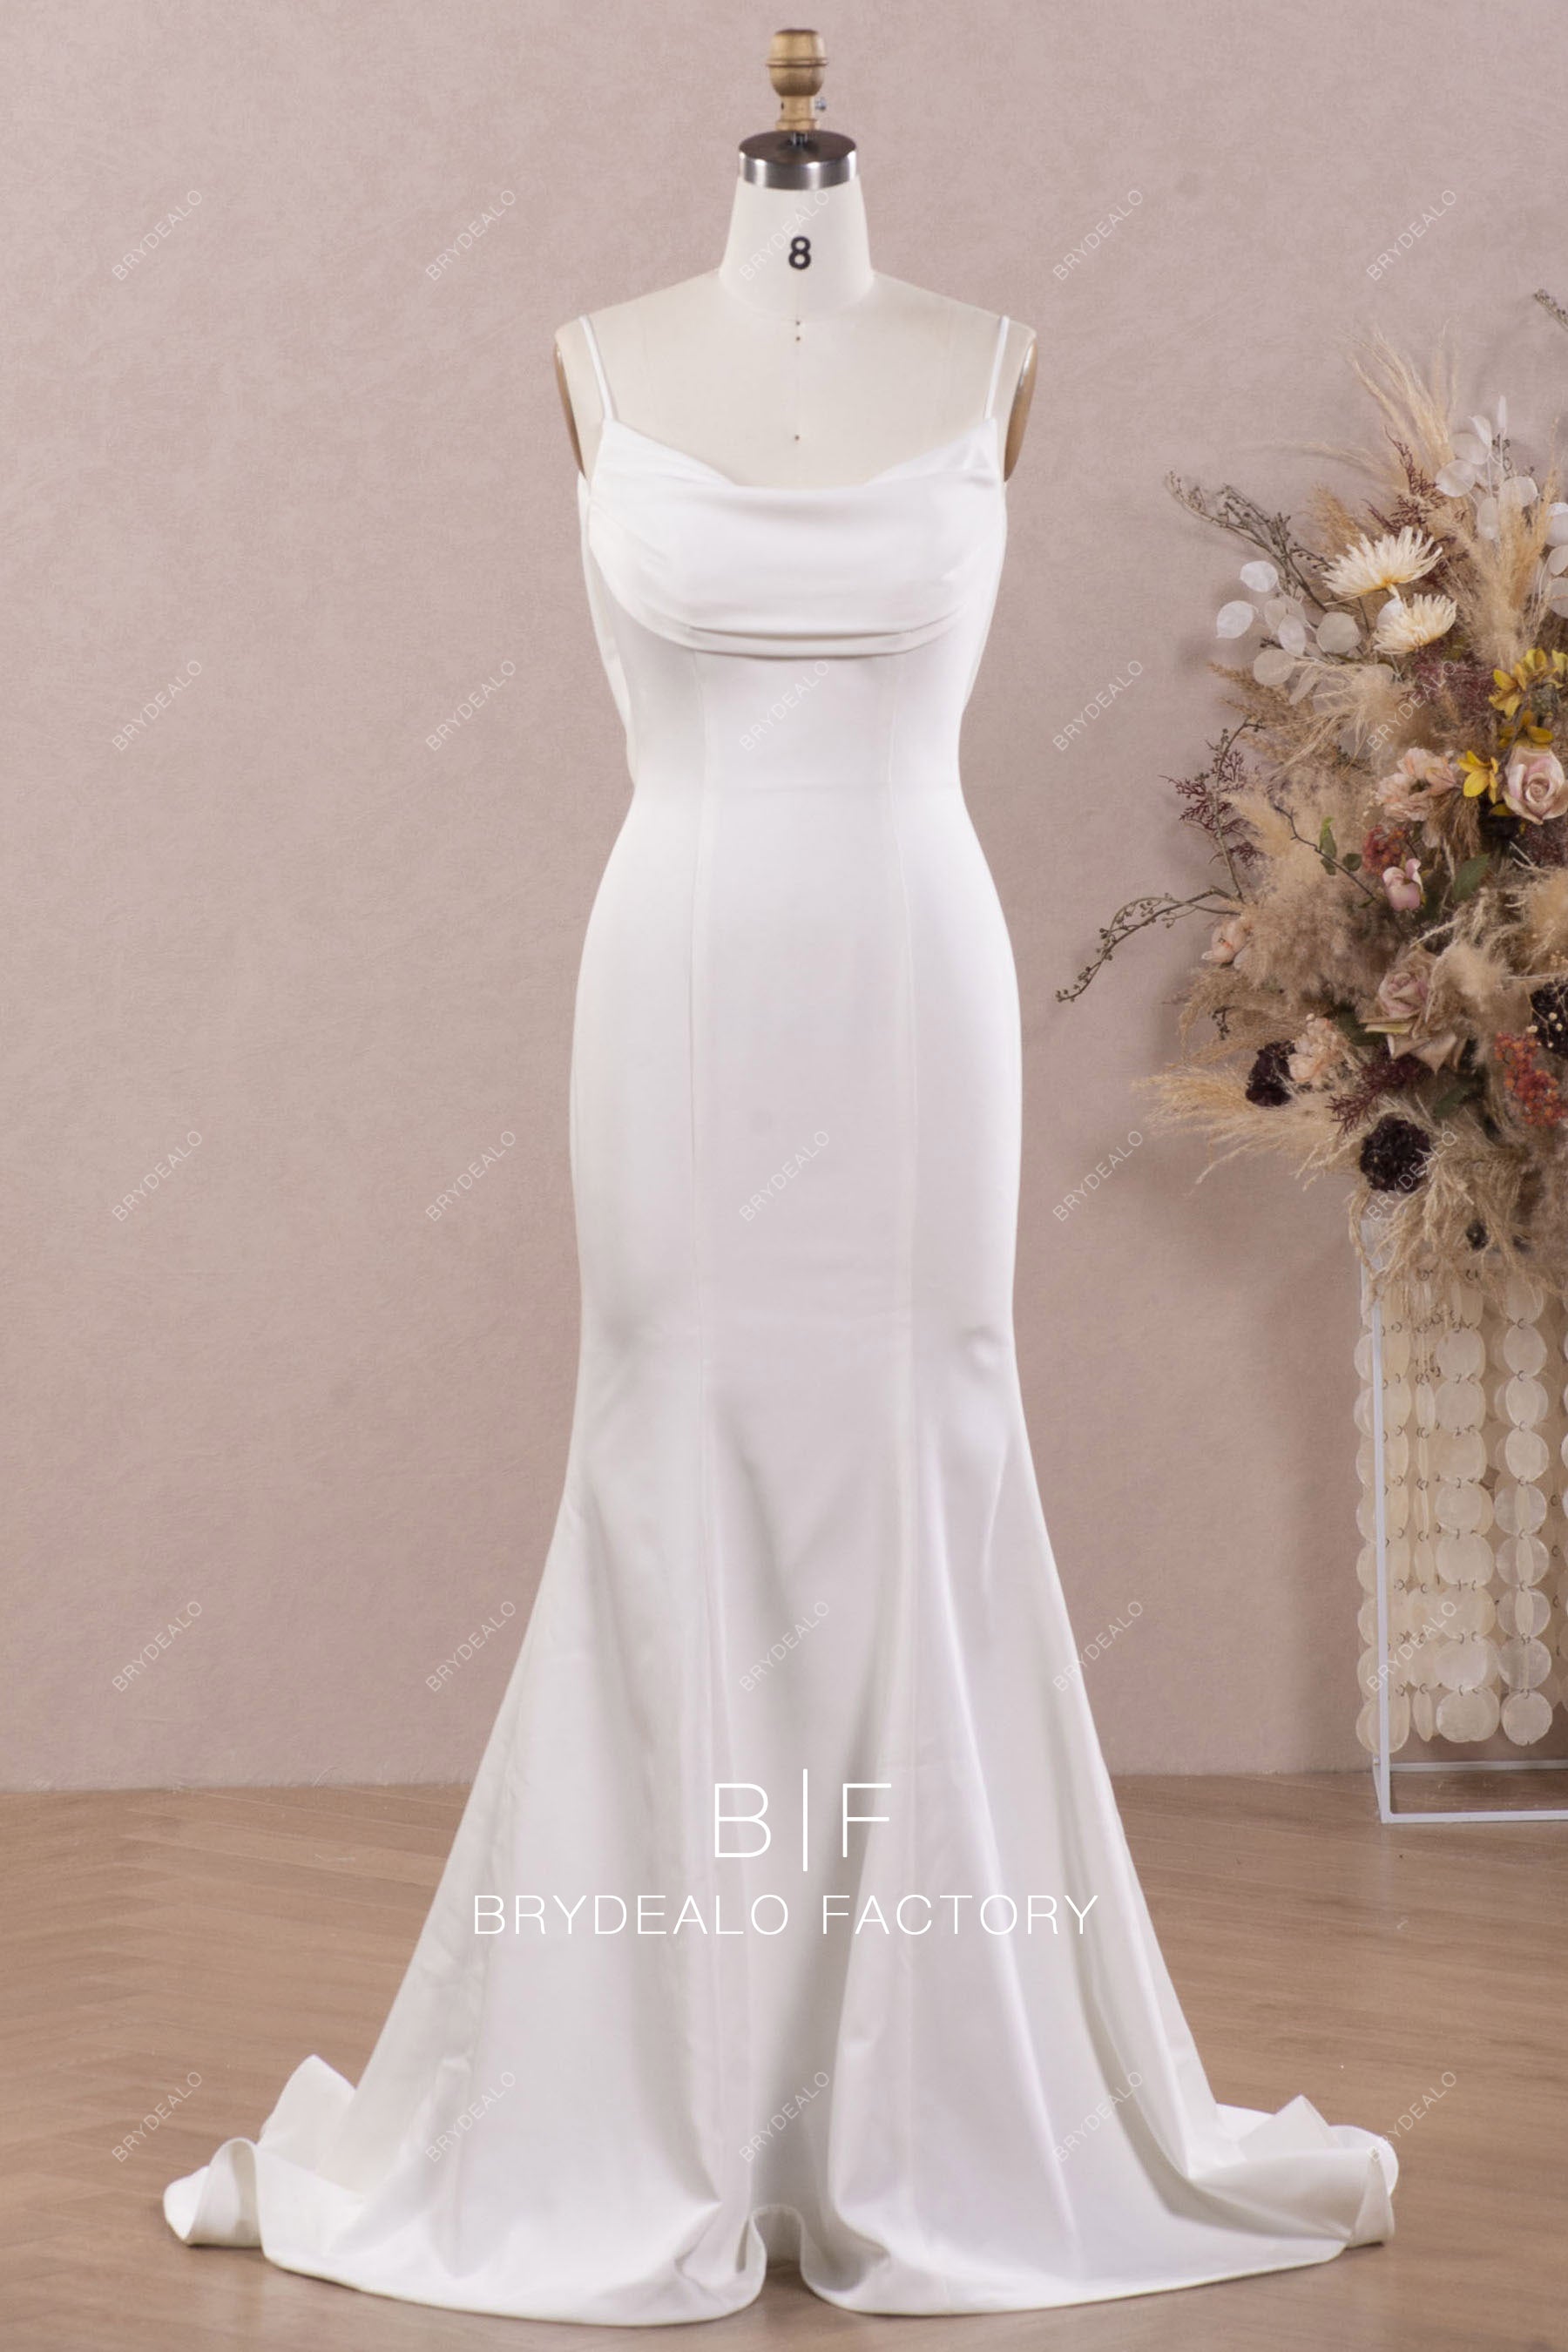 Wholesale Wedding Dresses & Special Occasion Dresses Supplier